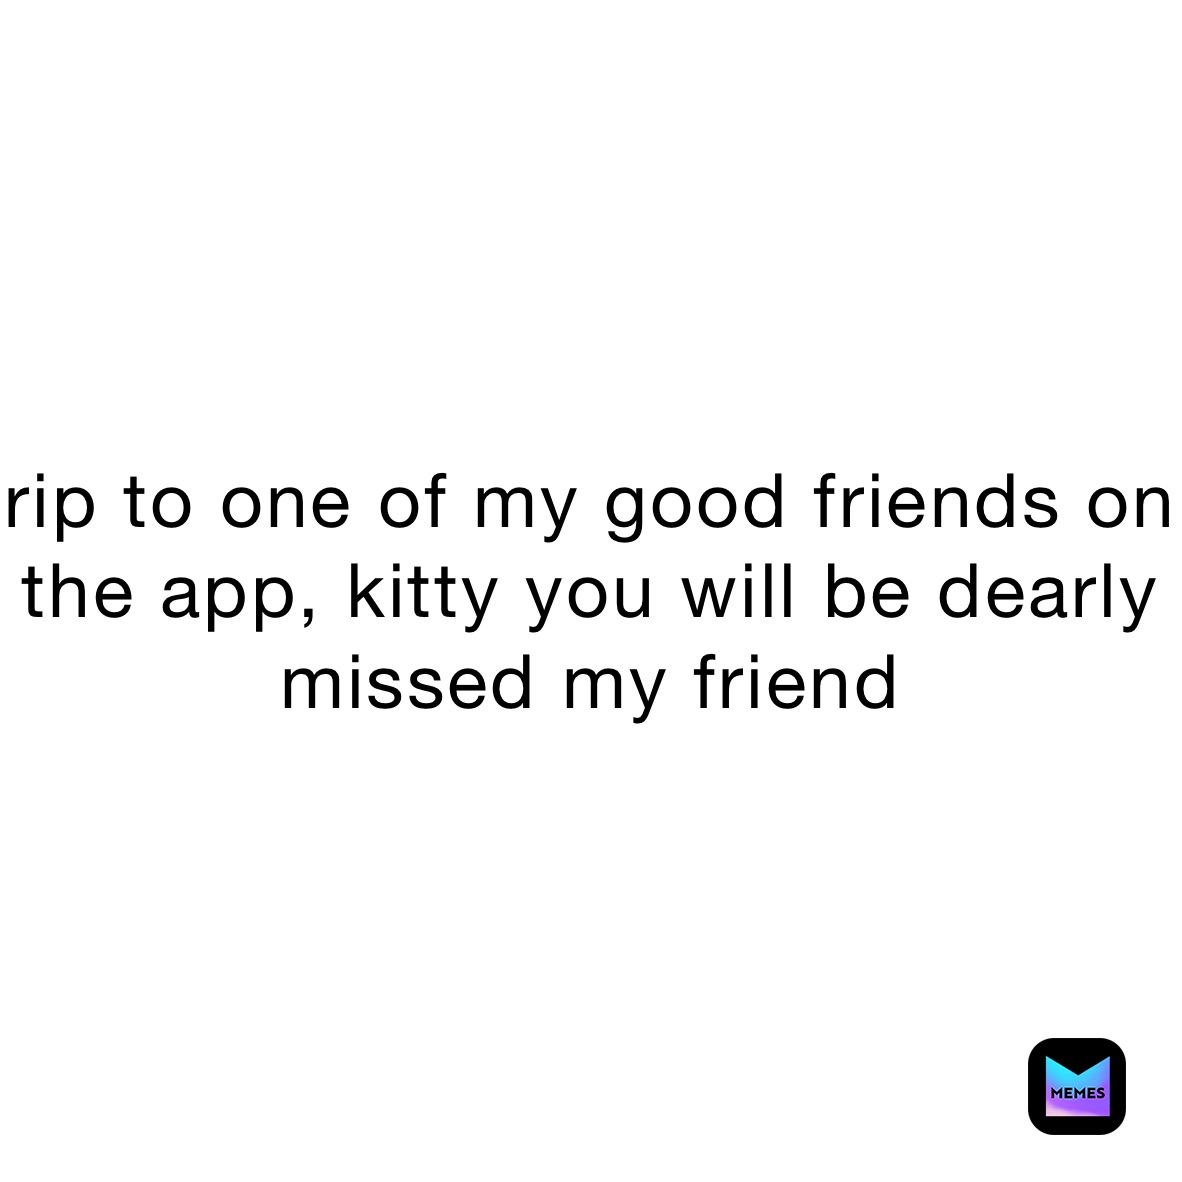 rip to one of my good friends on the app, kitty you will be dearly missed my friend